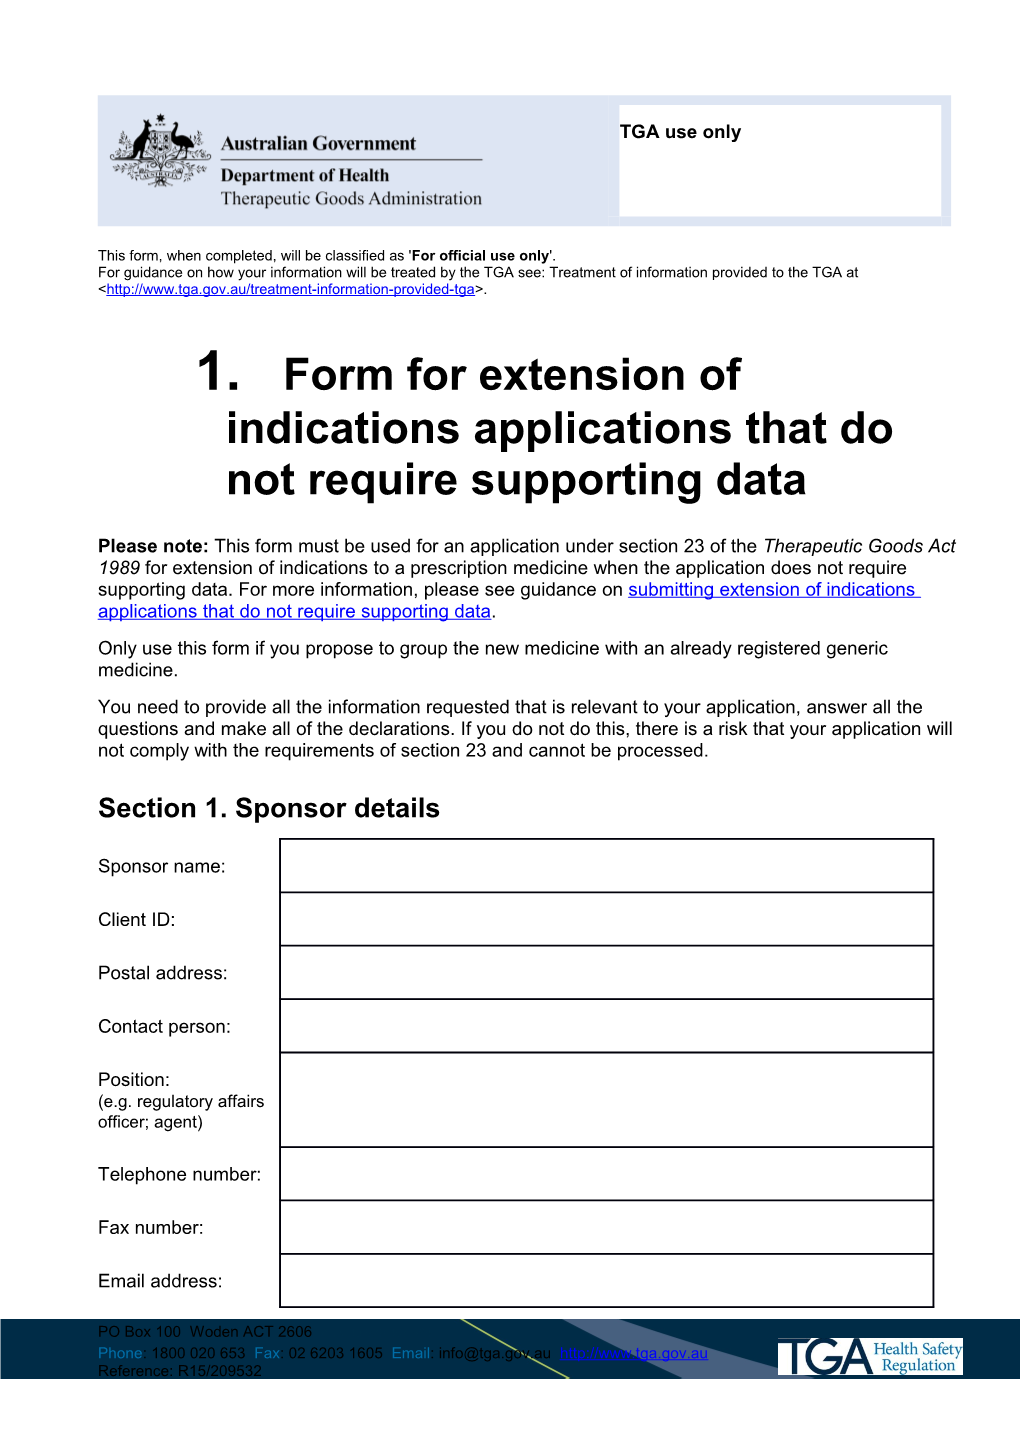 Form for Extension of Indications Applications That Do Not Require Supporting Data